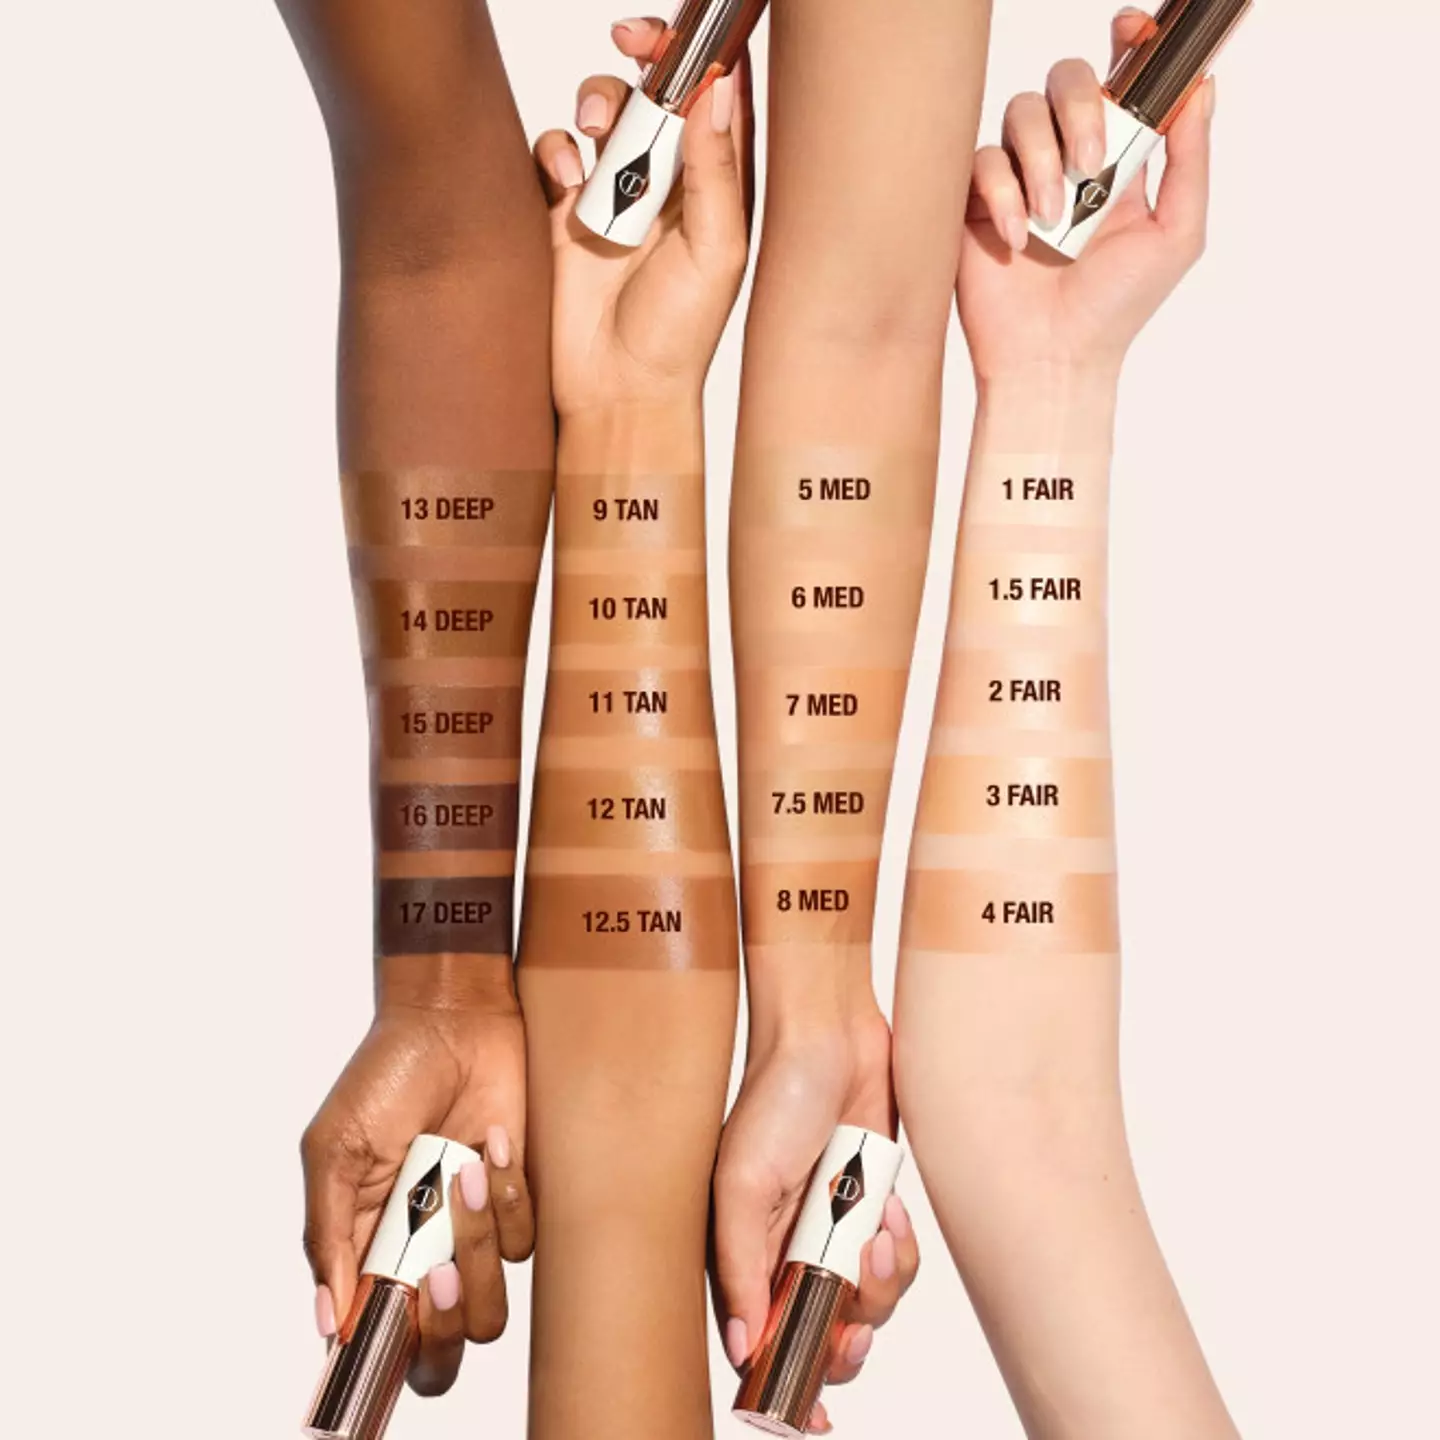 It is available in 17 shades. (Charlotte Tilbury)